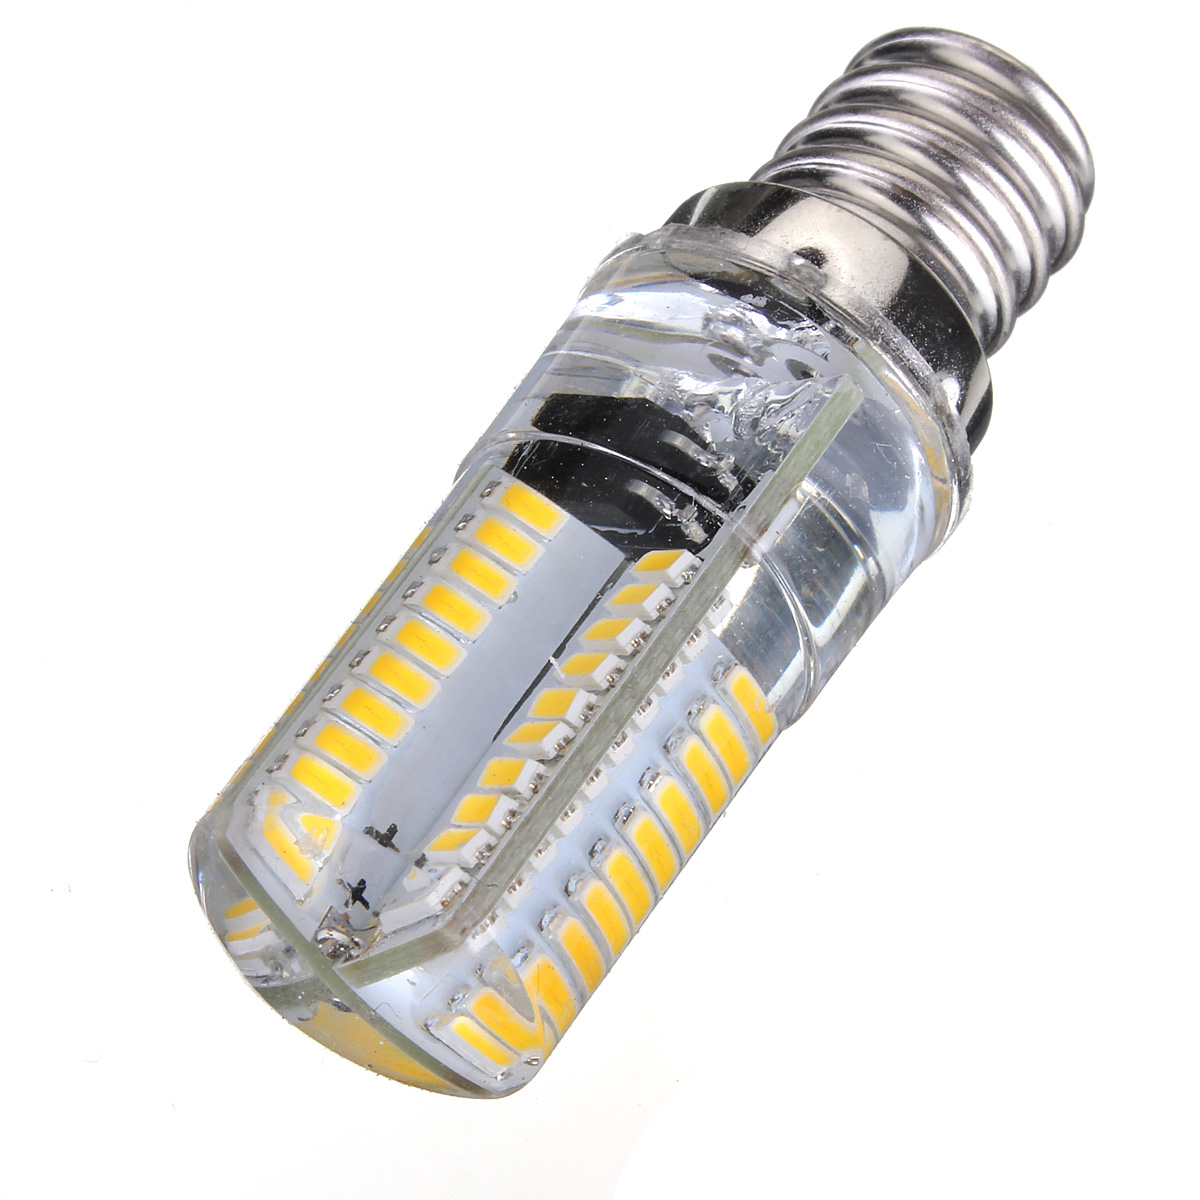 110-120V-3W-80LED-3014-SMD-E12-LED-Dimmable-Silicone-Crystal-Bulb-964373-10